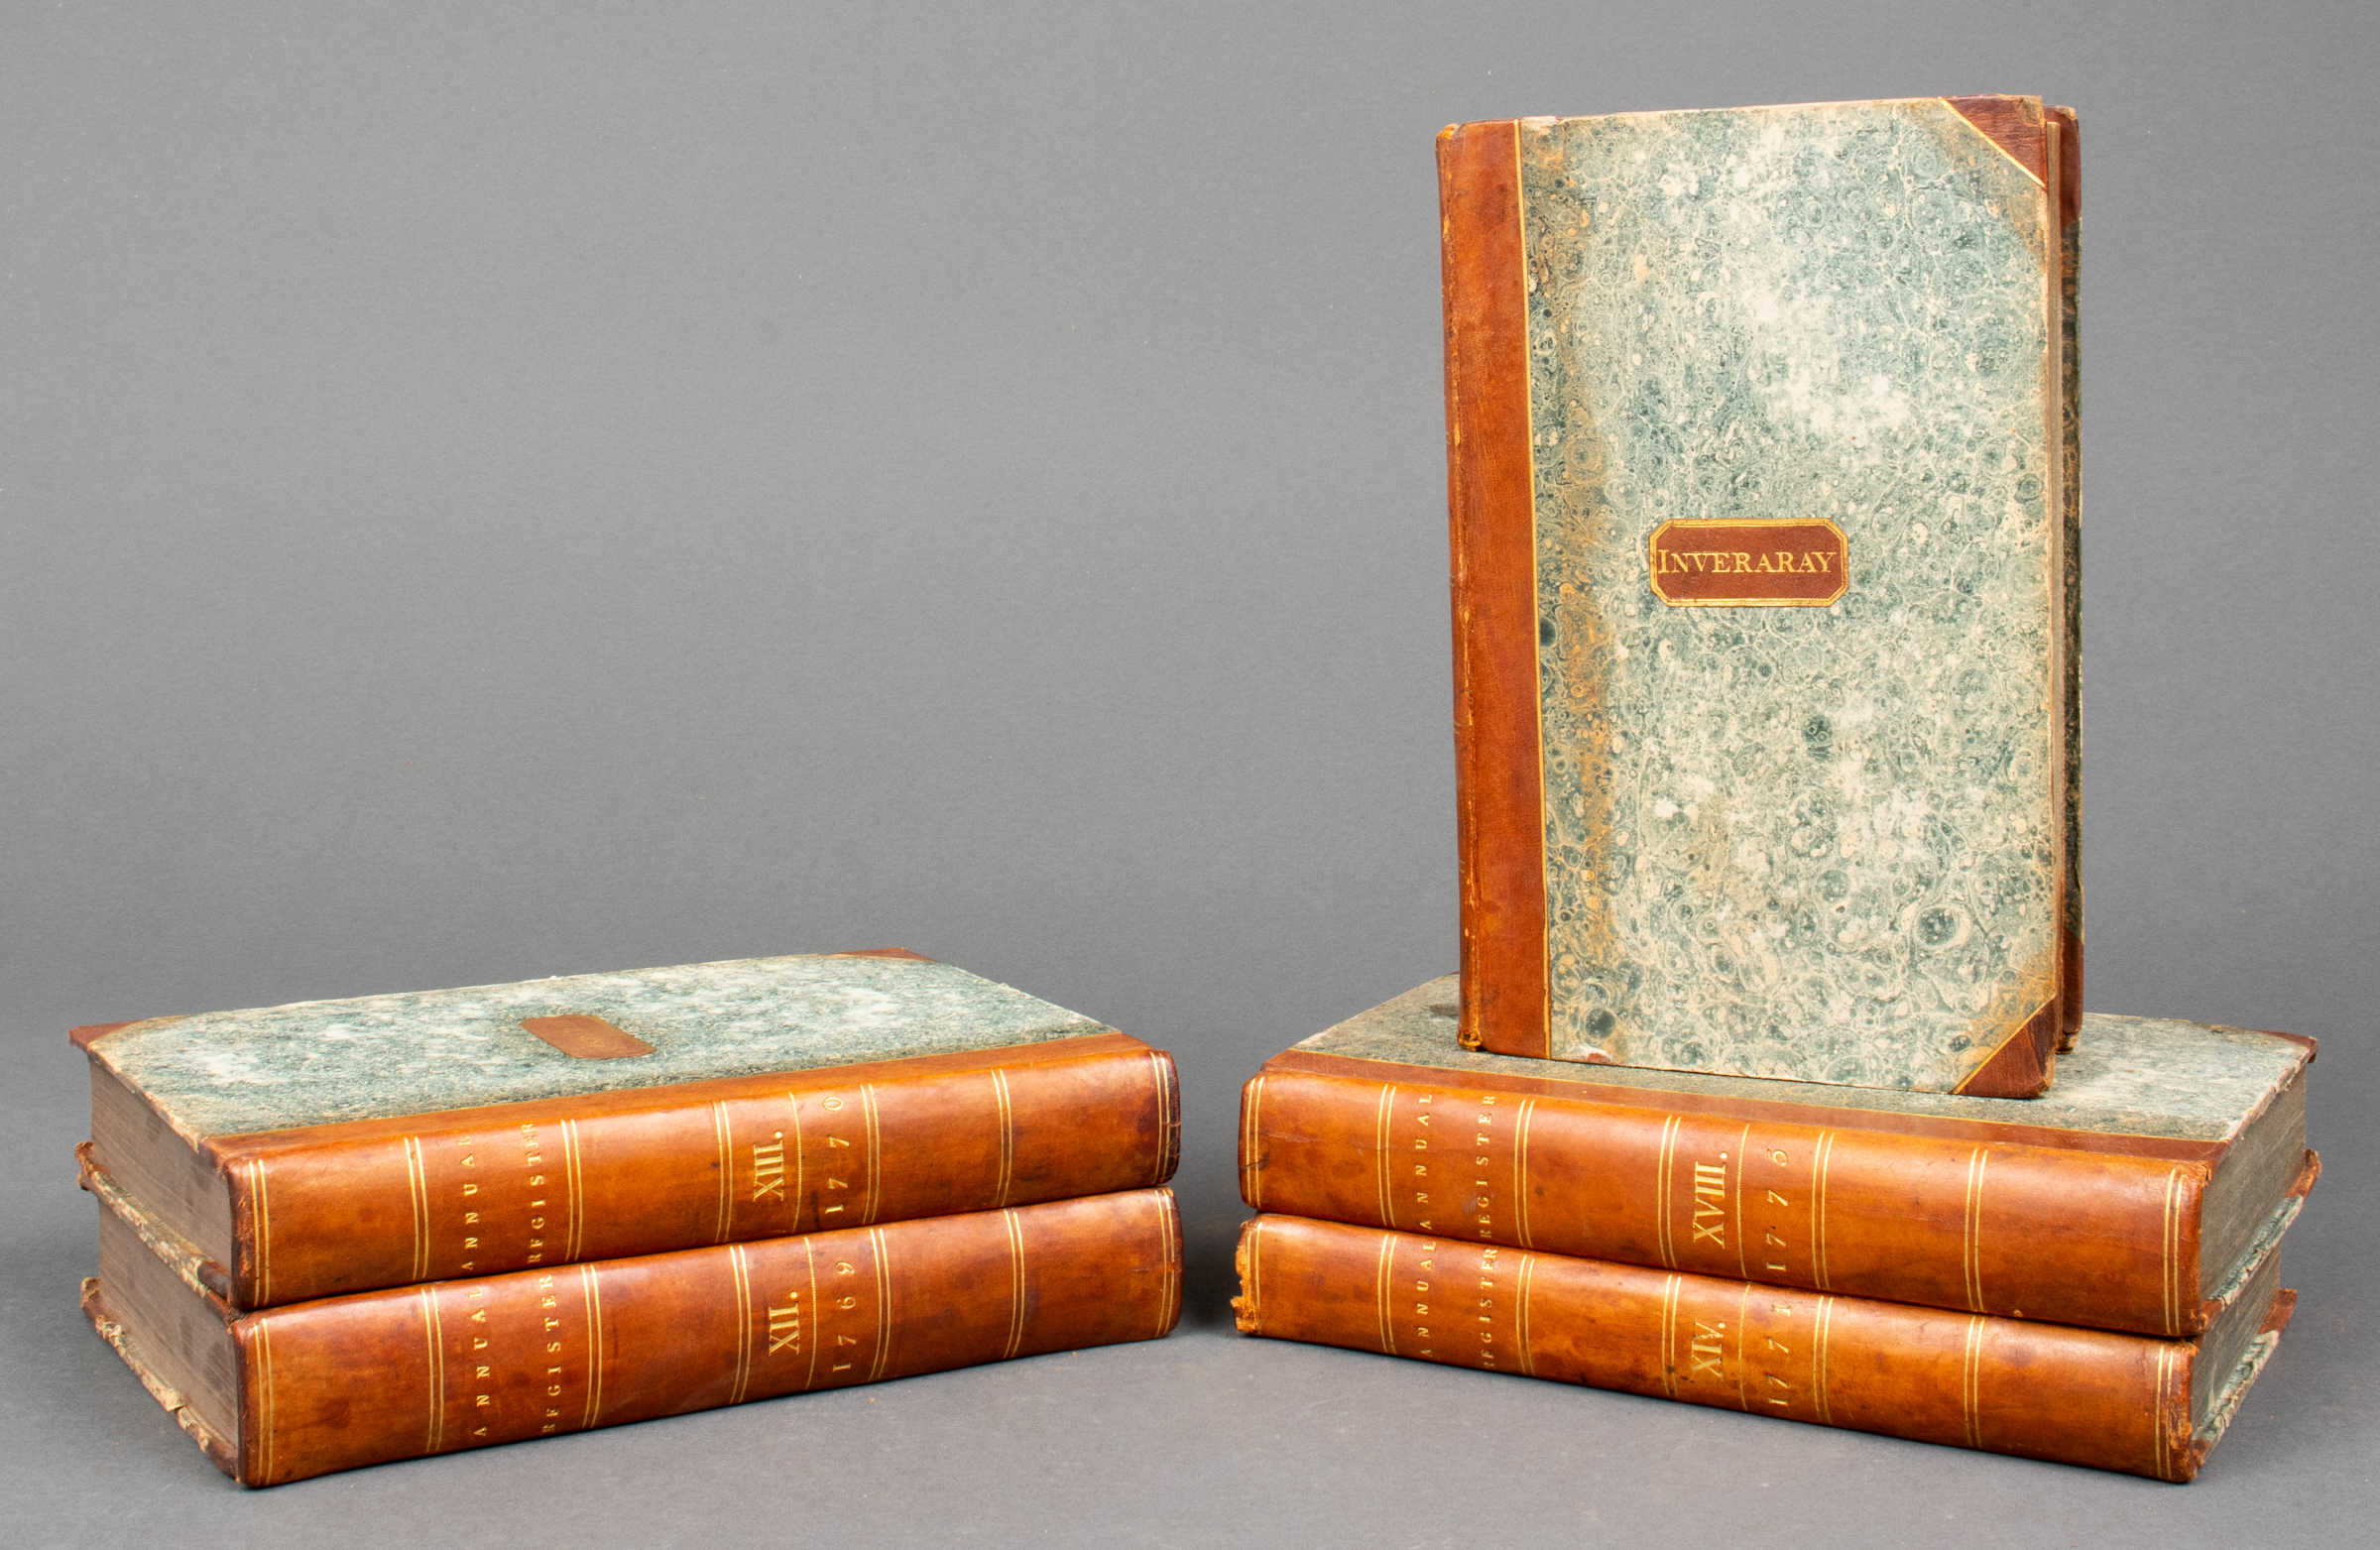 THE ANNUAL REGISTER, 5 VOLUMES,